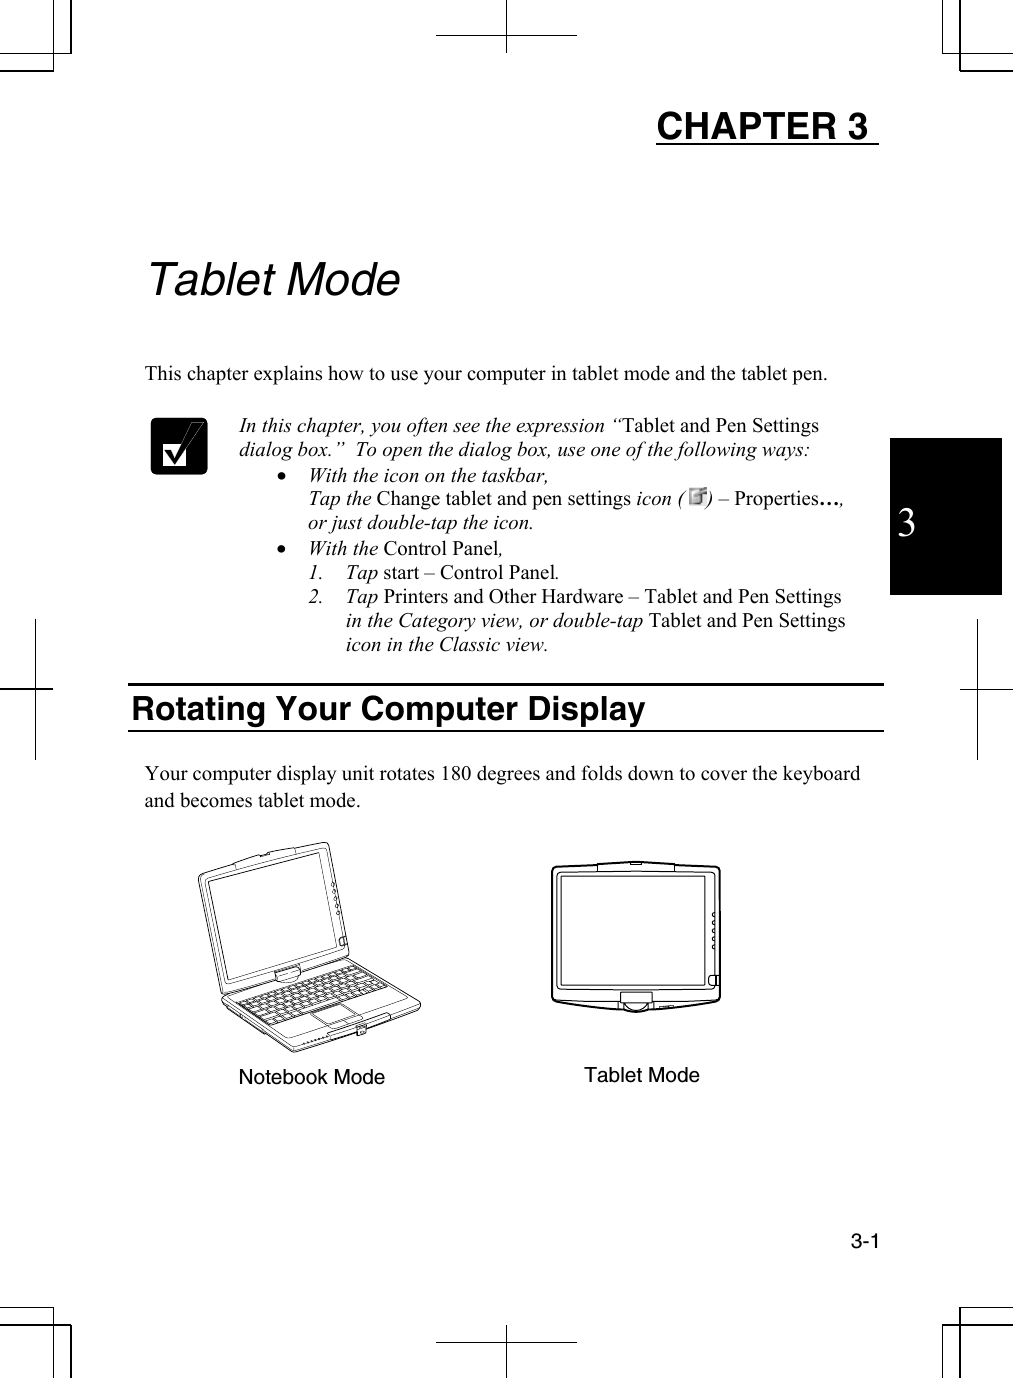  3-1  3 CHAPTER 3     Tablet Mode  This chapter explains how to use your computer in tablet mode and the tablet pen.   In this chapter, you often see the expression “Tablet and Pen Settings dialog box.”  To open the dialog box, use one of the following ways: •  With the icon on the taskbar, Tap the Change tablet and pen settings icon (  ) – Properties…, or just double-tap the icon.  •  With the Control Panel, 1. Tap start – Control Panel. 2. Tap Printers and Other Hardware – Tablet and Pen Settings in the Category view, or double-tap Tablet and Pen Settings icon in the Classic view.  Rotating Your Computer Display  Your computer display unit rotates 180 degrees and folds down to cover the keyboard and becomes tablet mode.               Notebook Mode  Tablet Mode 